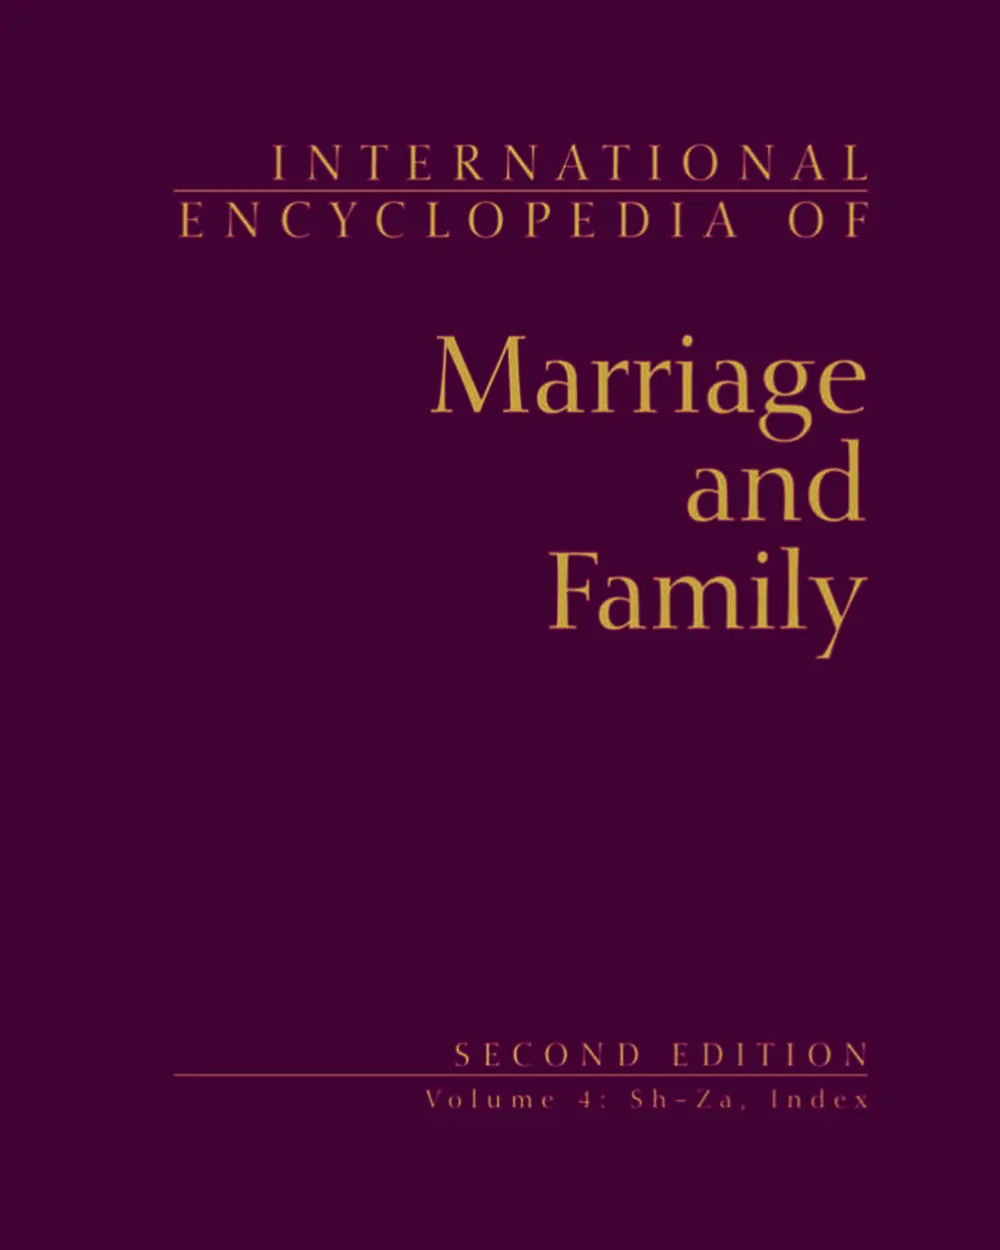 International Encyclopedia of Marriage and Family - Volume 4